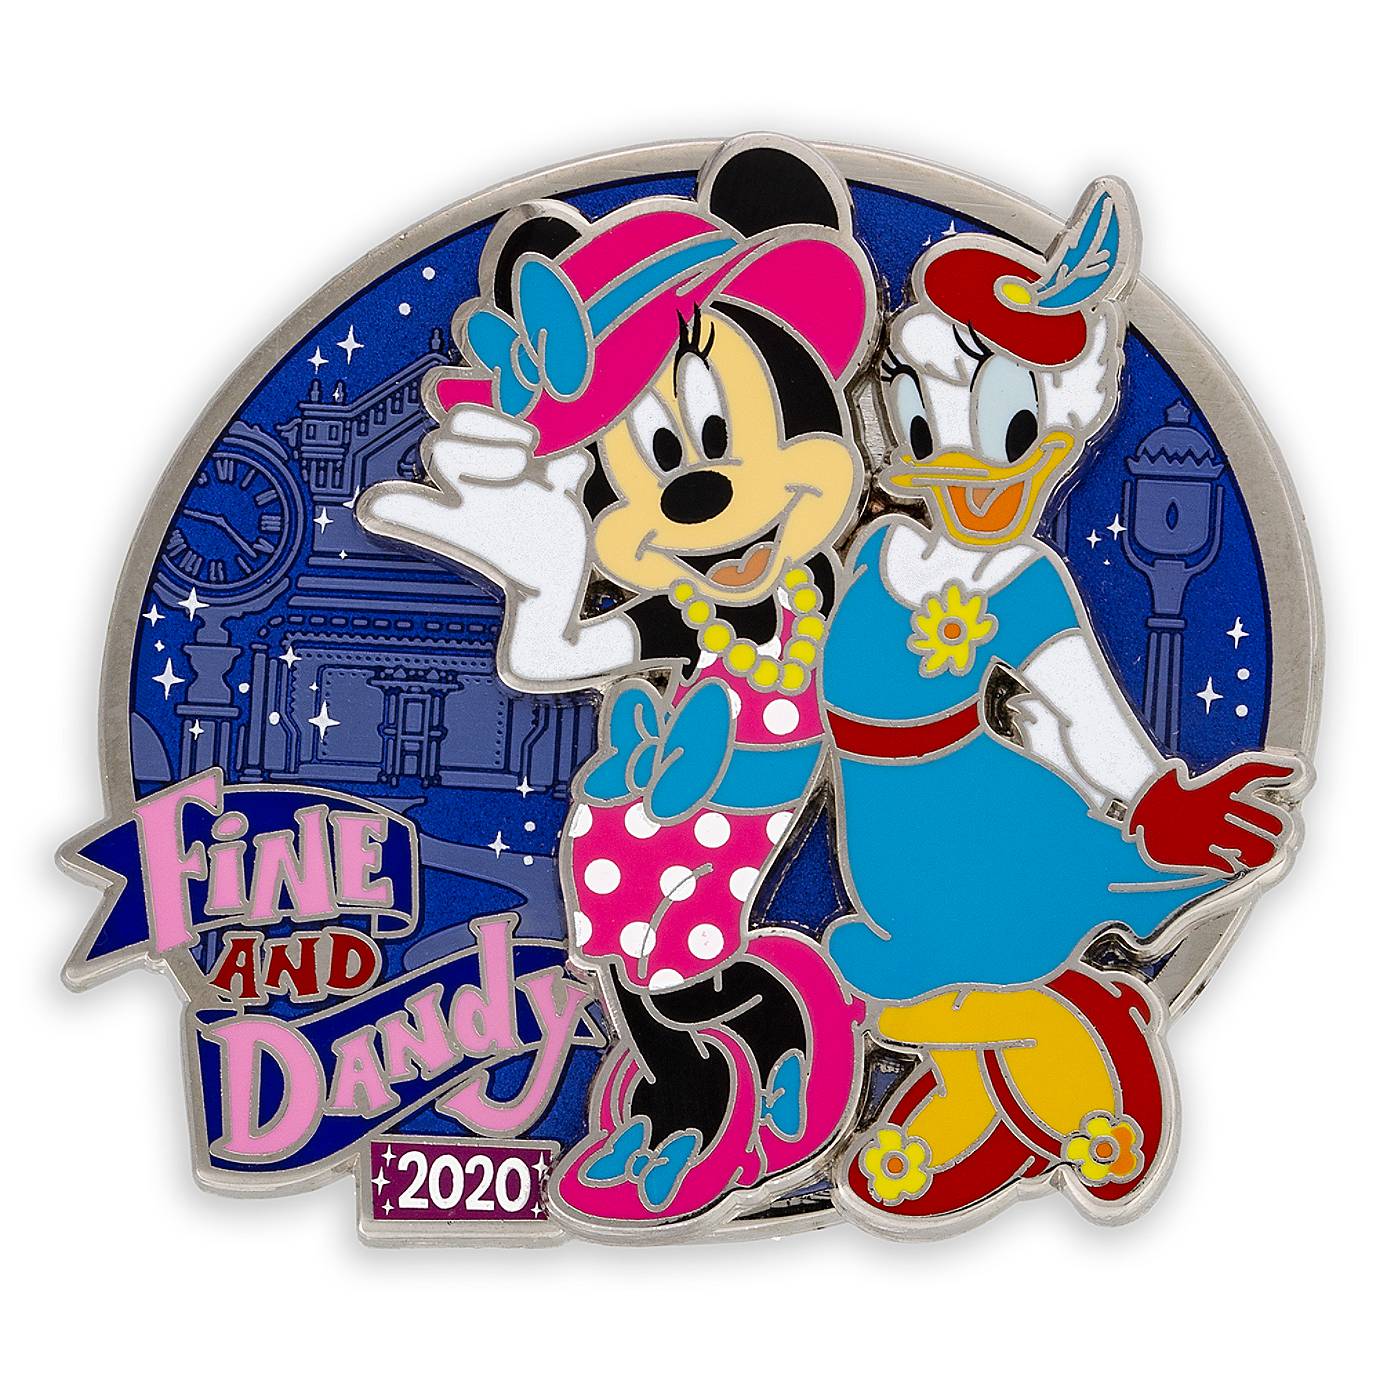 Disney Parks Minnie Mouse and Daisy Duck Pin 2020 Limited Edition New with Card